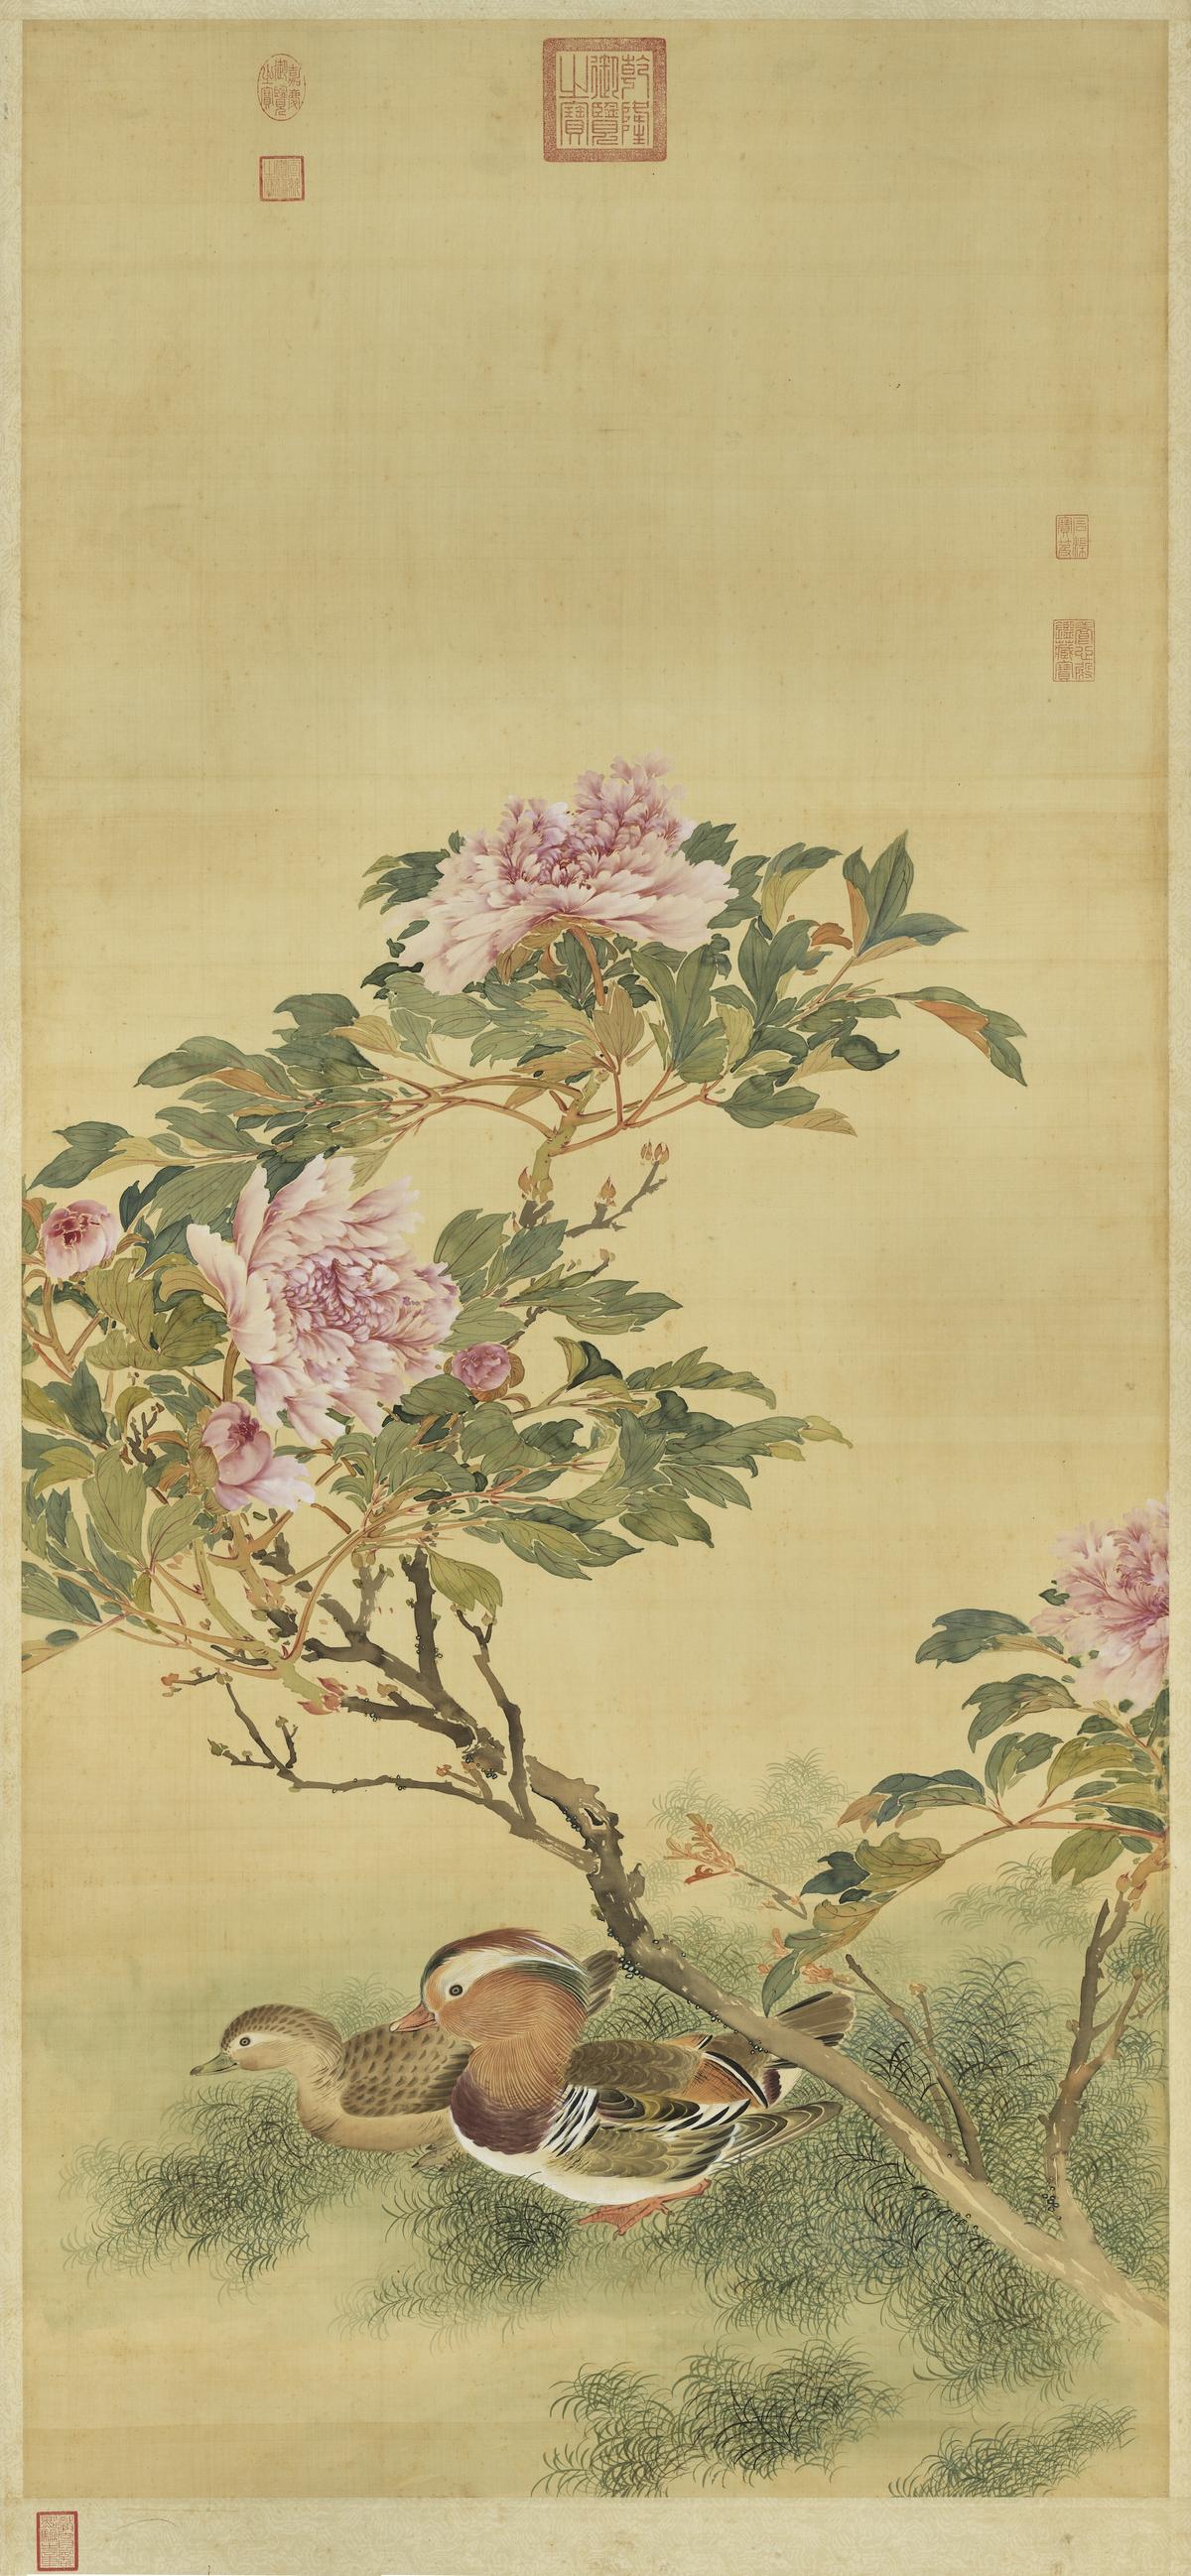 Yuanyang Under the Blooming Peonies, painting by Anonymous, Ming Dynasty. (Courtesy of the National Palace Museum)